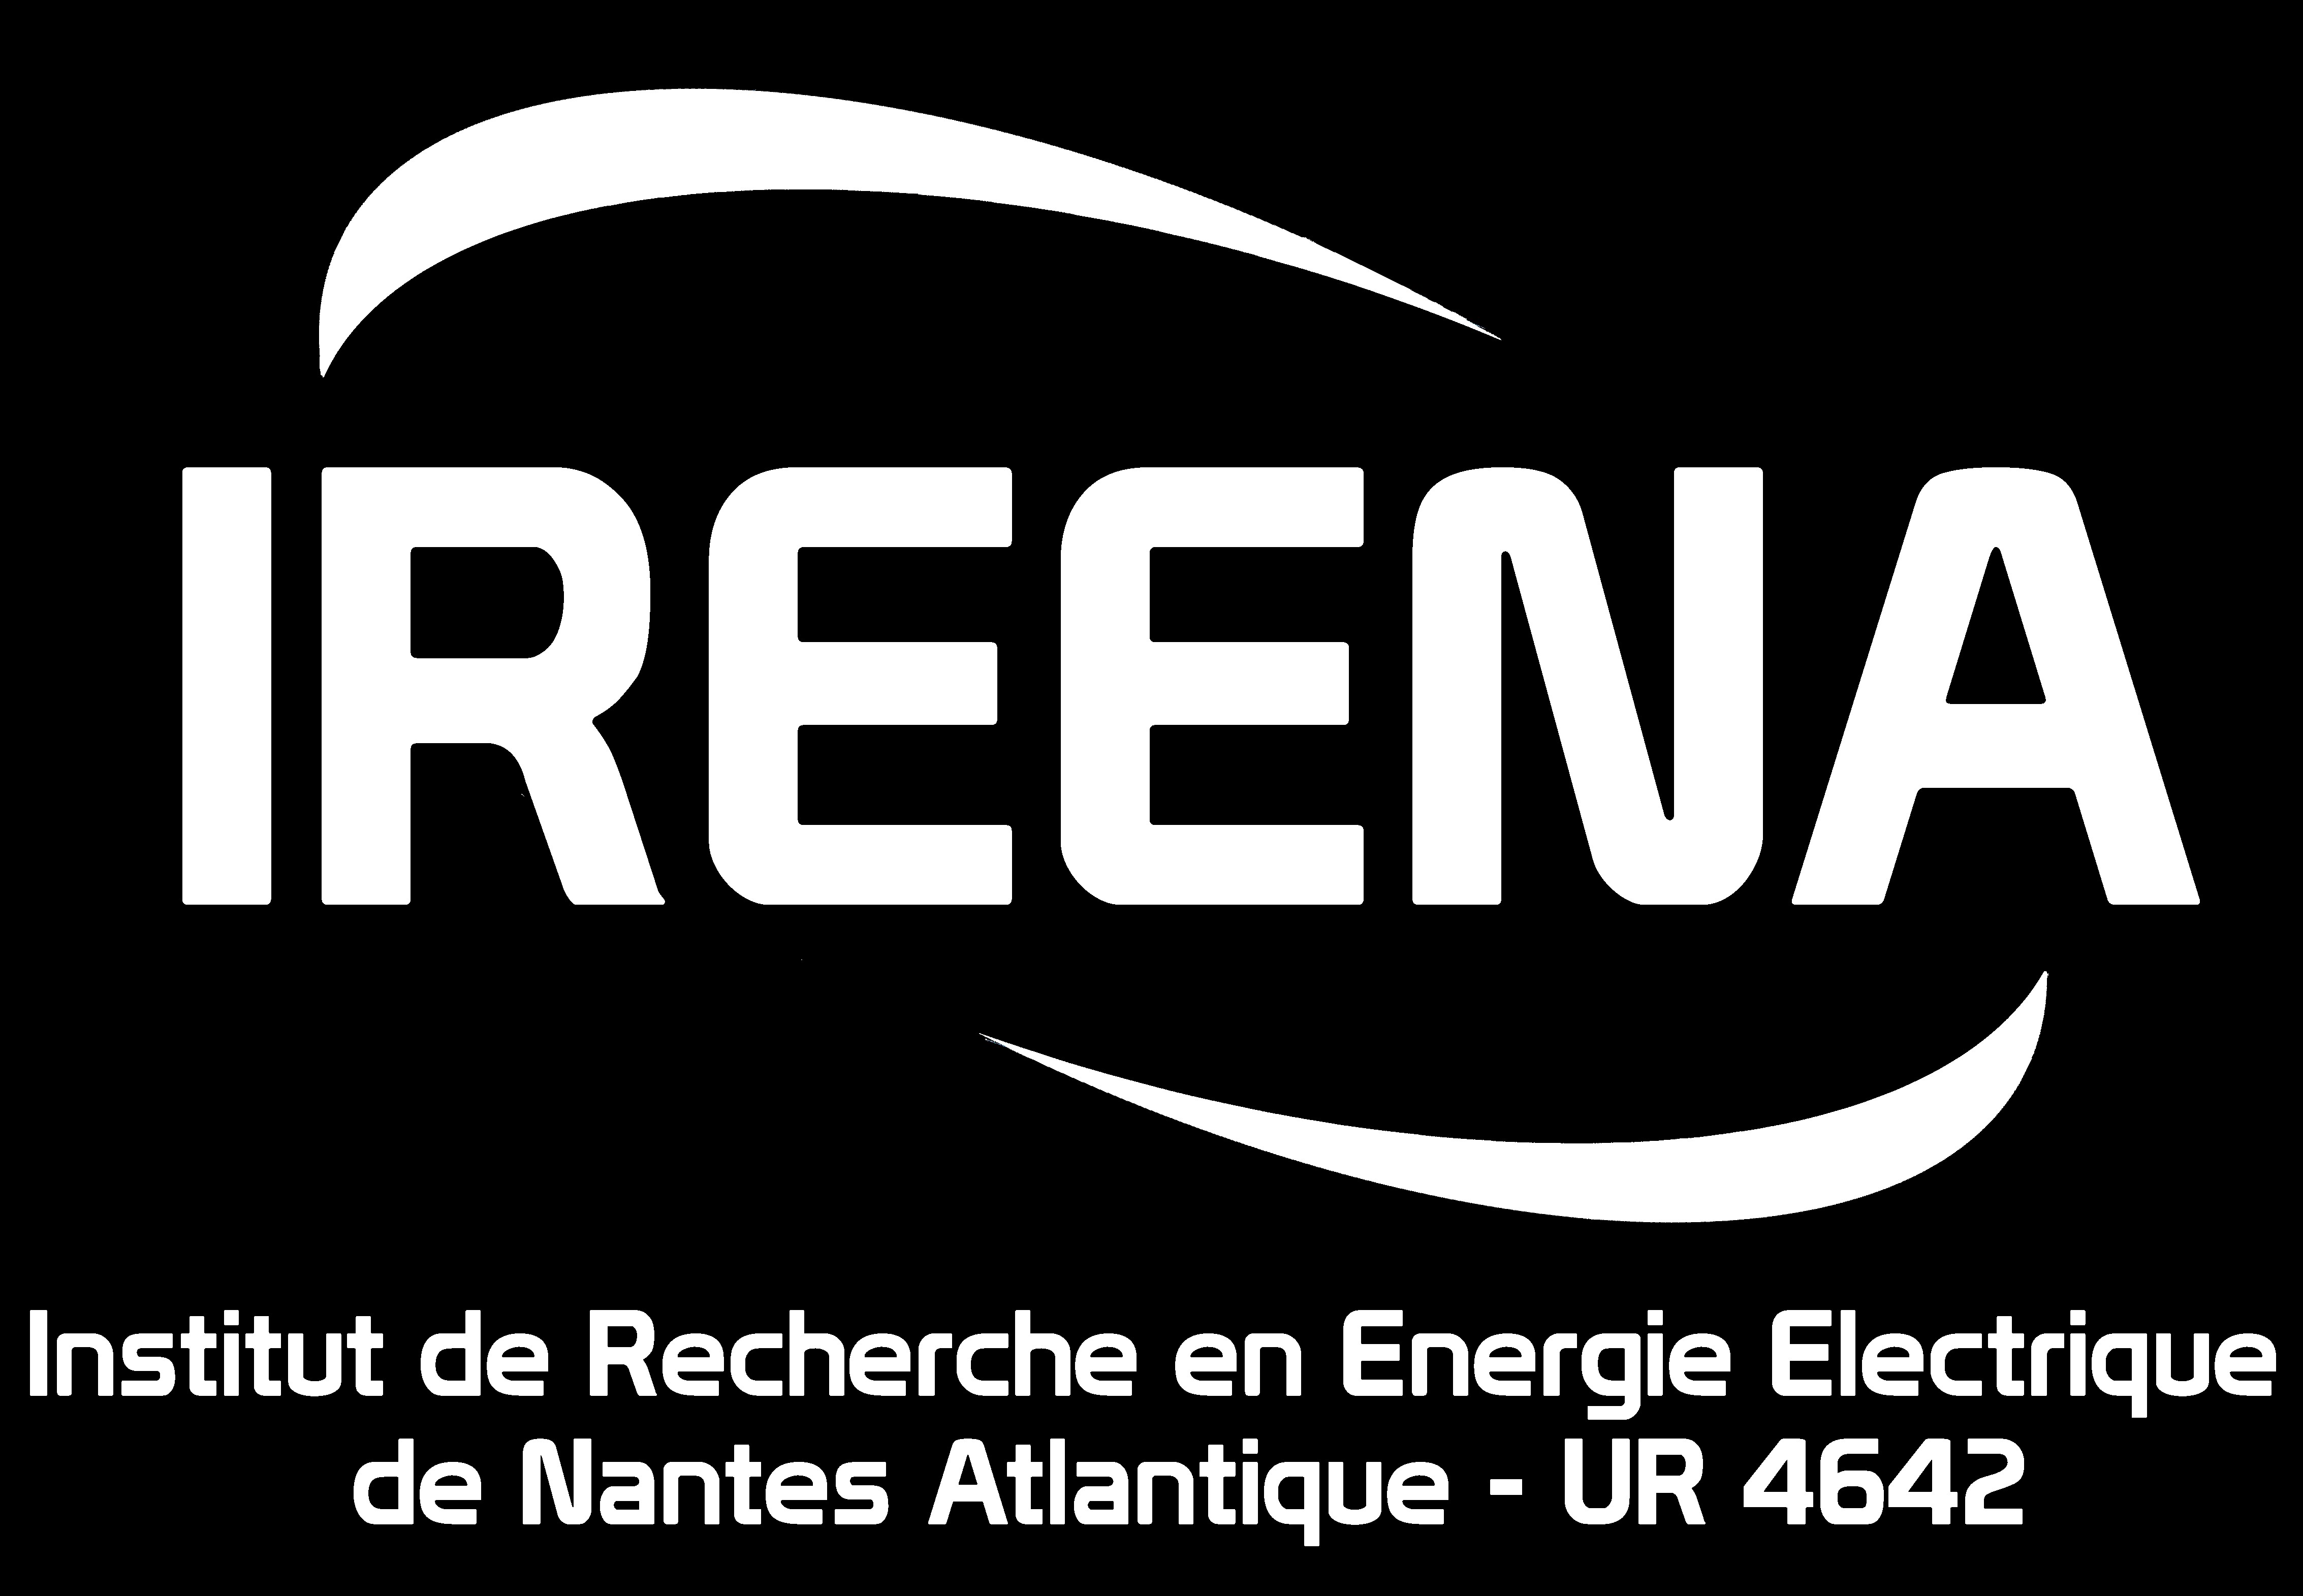 Nantes Atlantique Research Institute for Electrical Energy (IREENA)